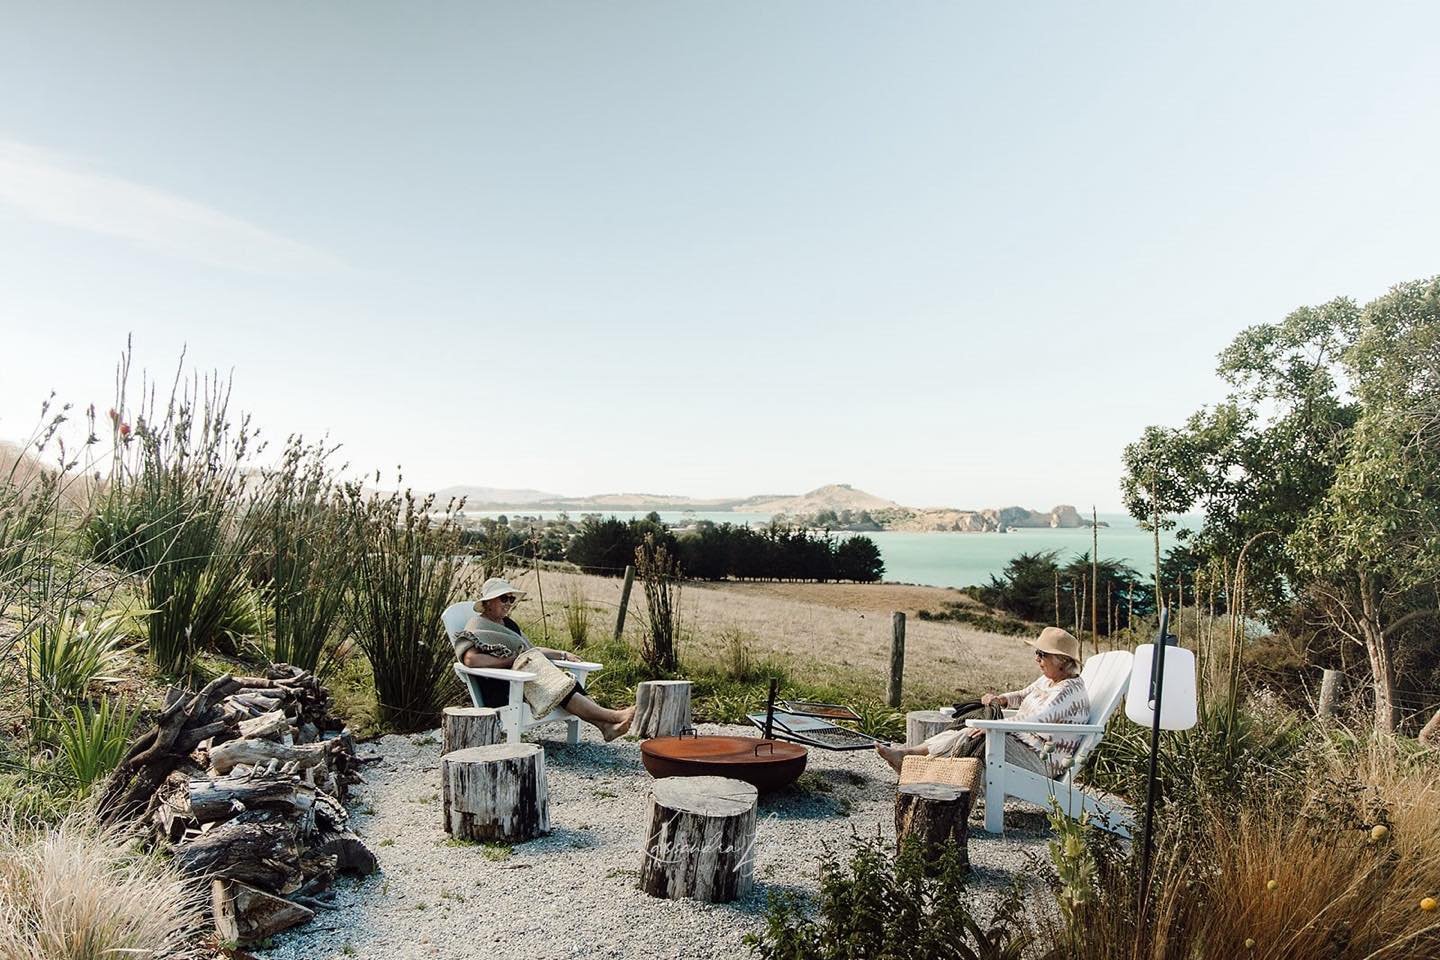 The firepit may have been out of action due to the fire ban for part of this summer &hellip;it&rsquo;s still a great spot to gather and drink in the views - I like to think of it as our own conversation pit! 

#discoverconnectreset
#firepit
#conversa